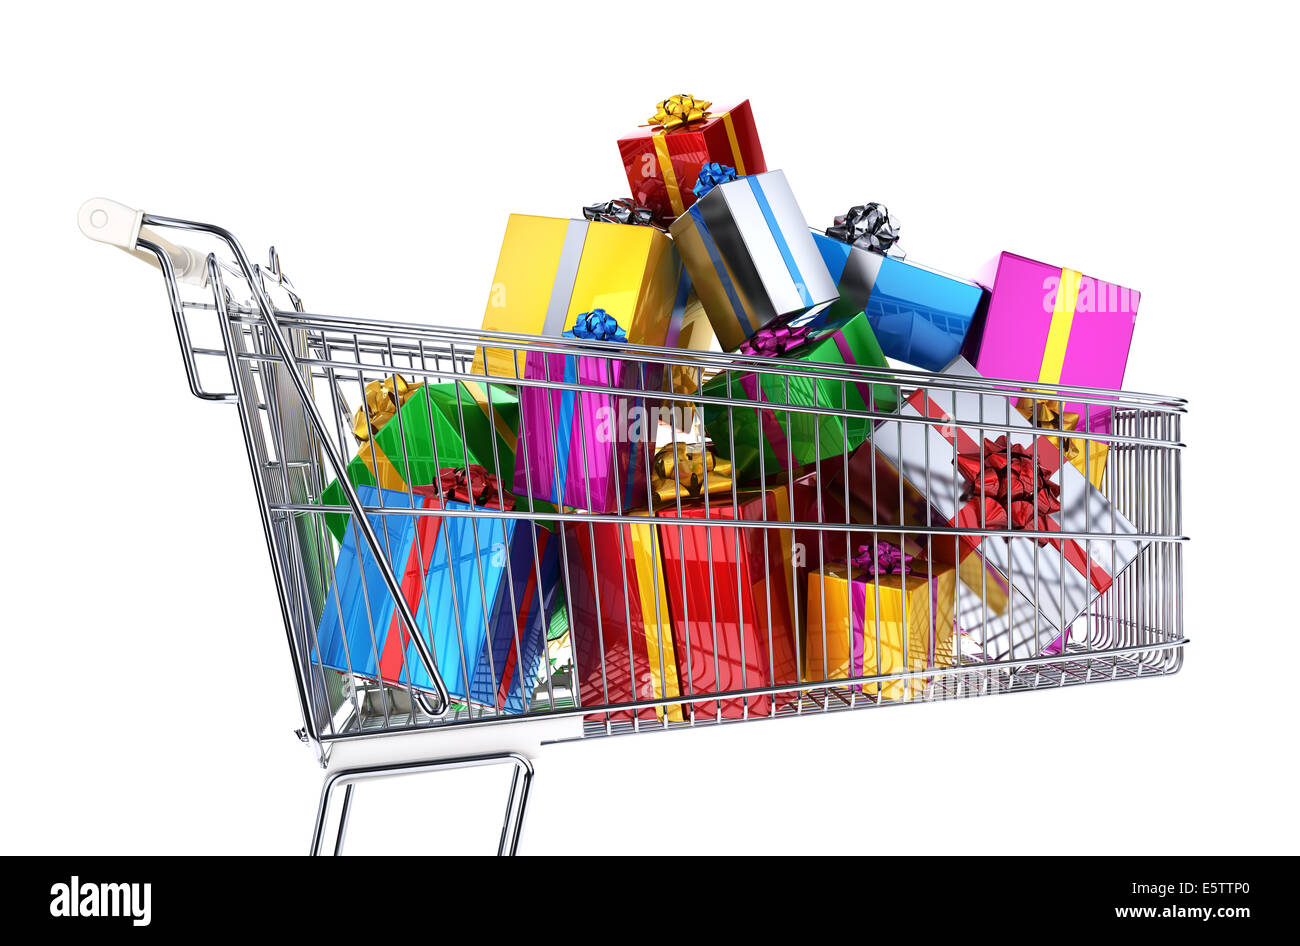 Supermarket trolley full of multicolored gifts. Side view, on white background. Clipping path included. Stock Photo